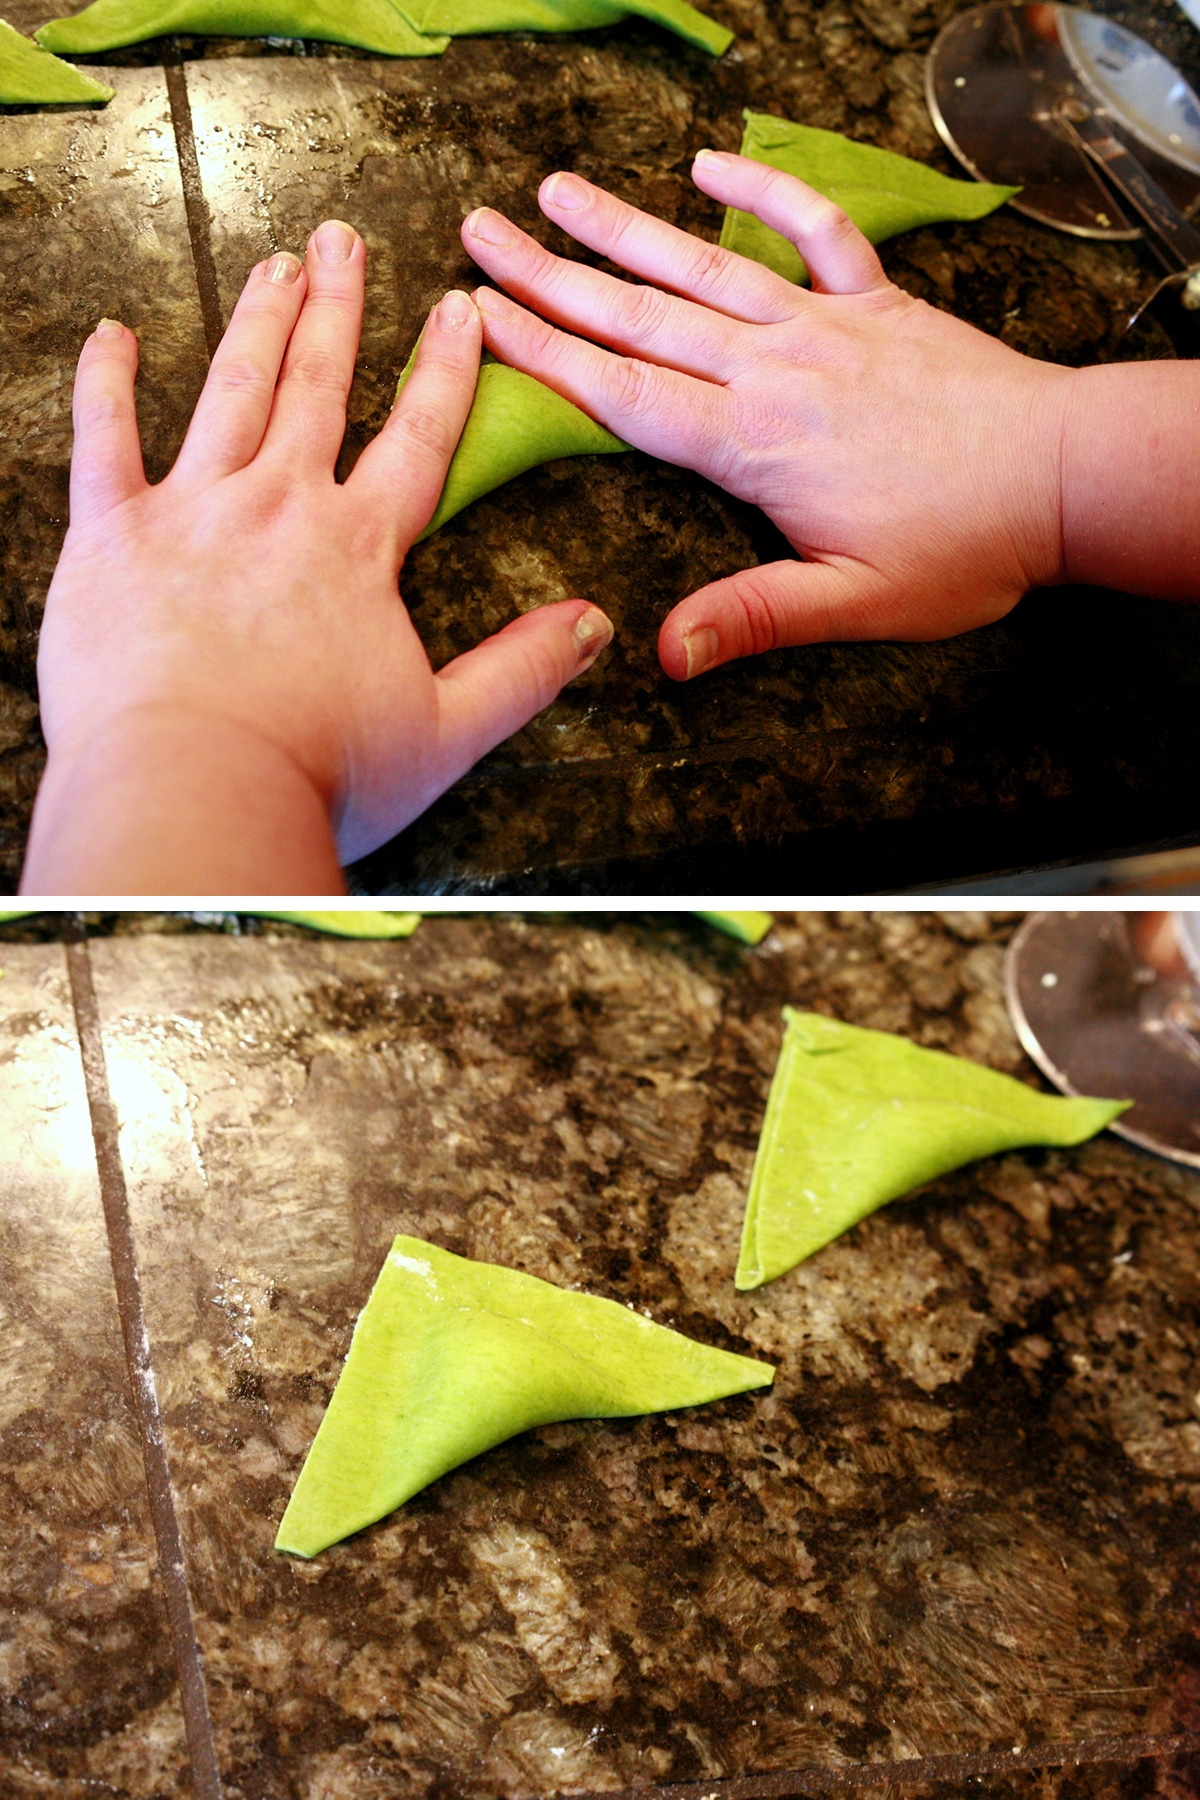 The pasta squares are being folded in half to form triangles, with hands pushing the air out as they're sealed.